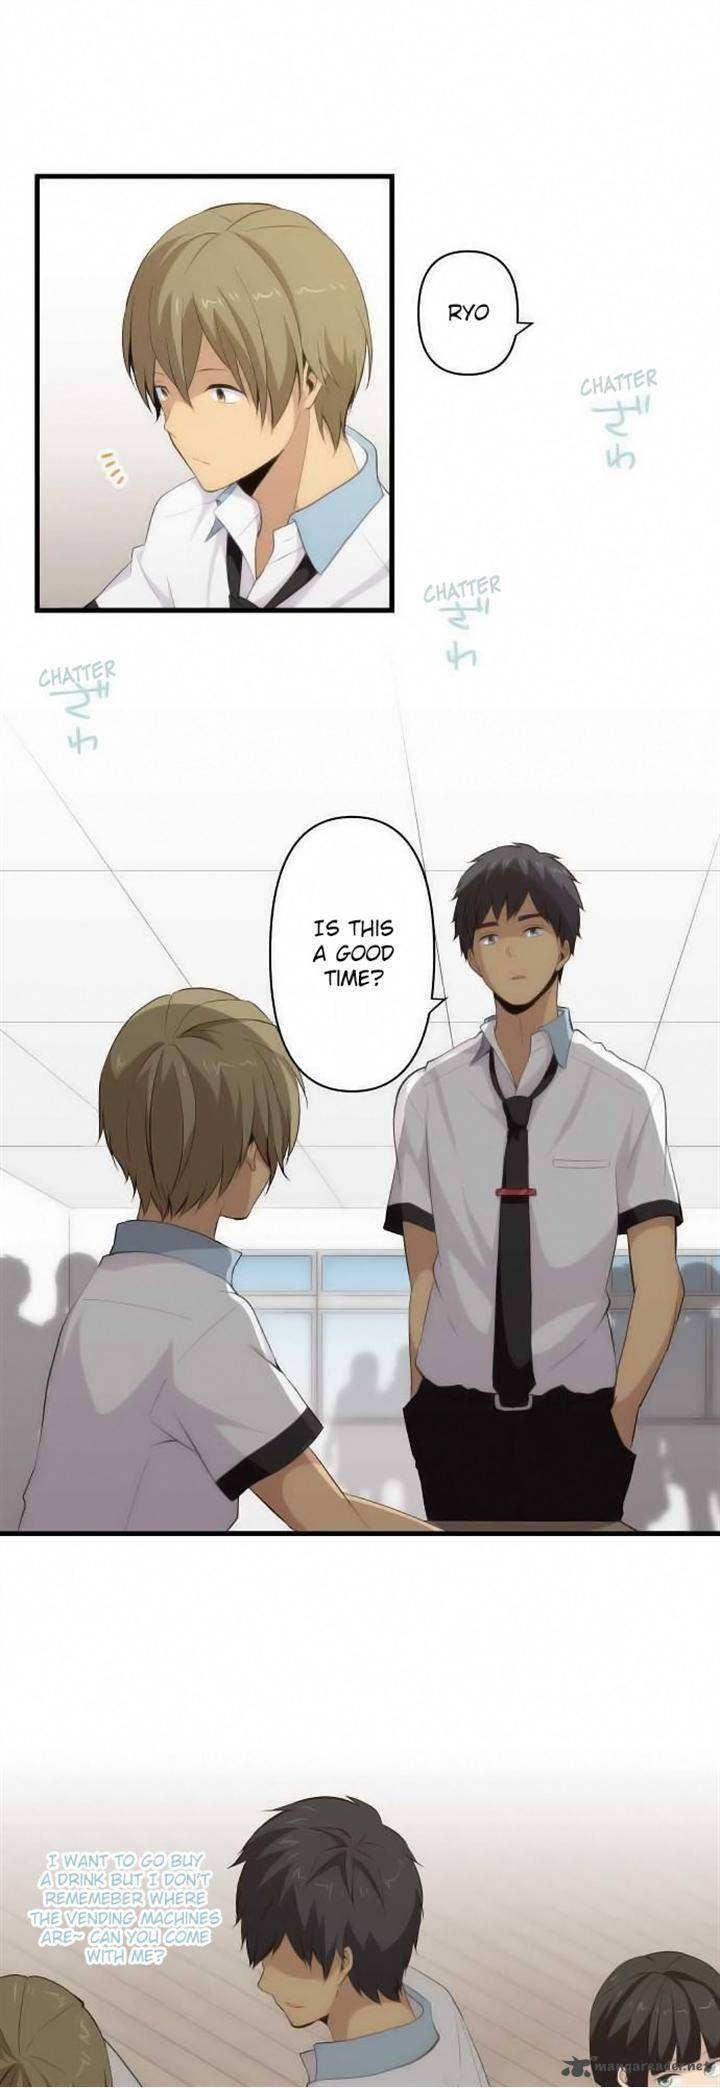 Relife 86 1